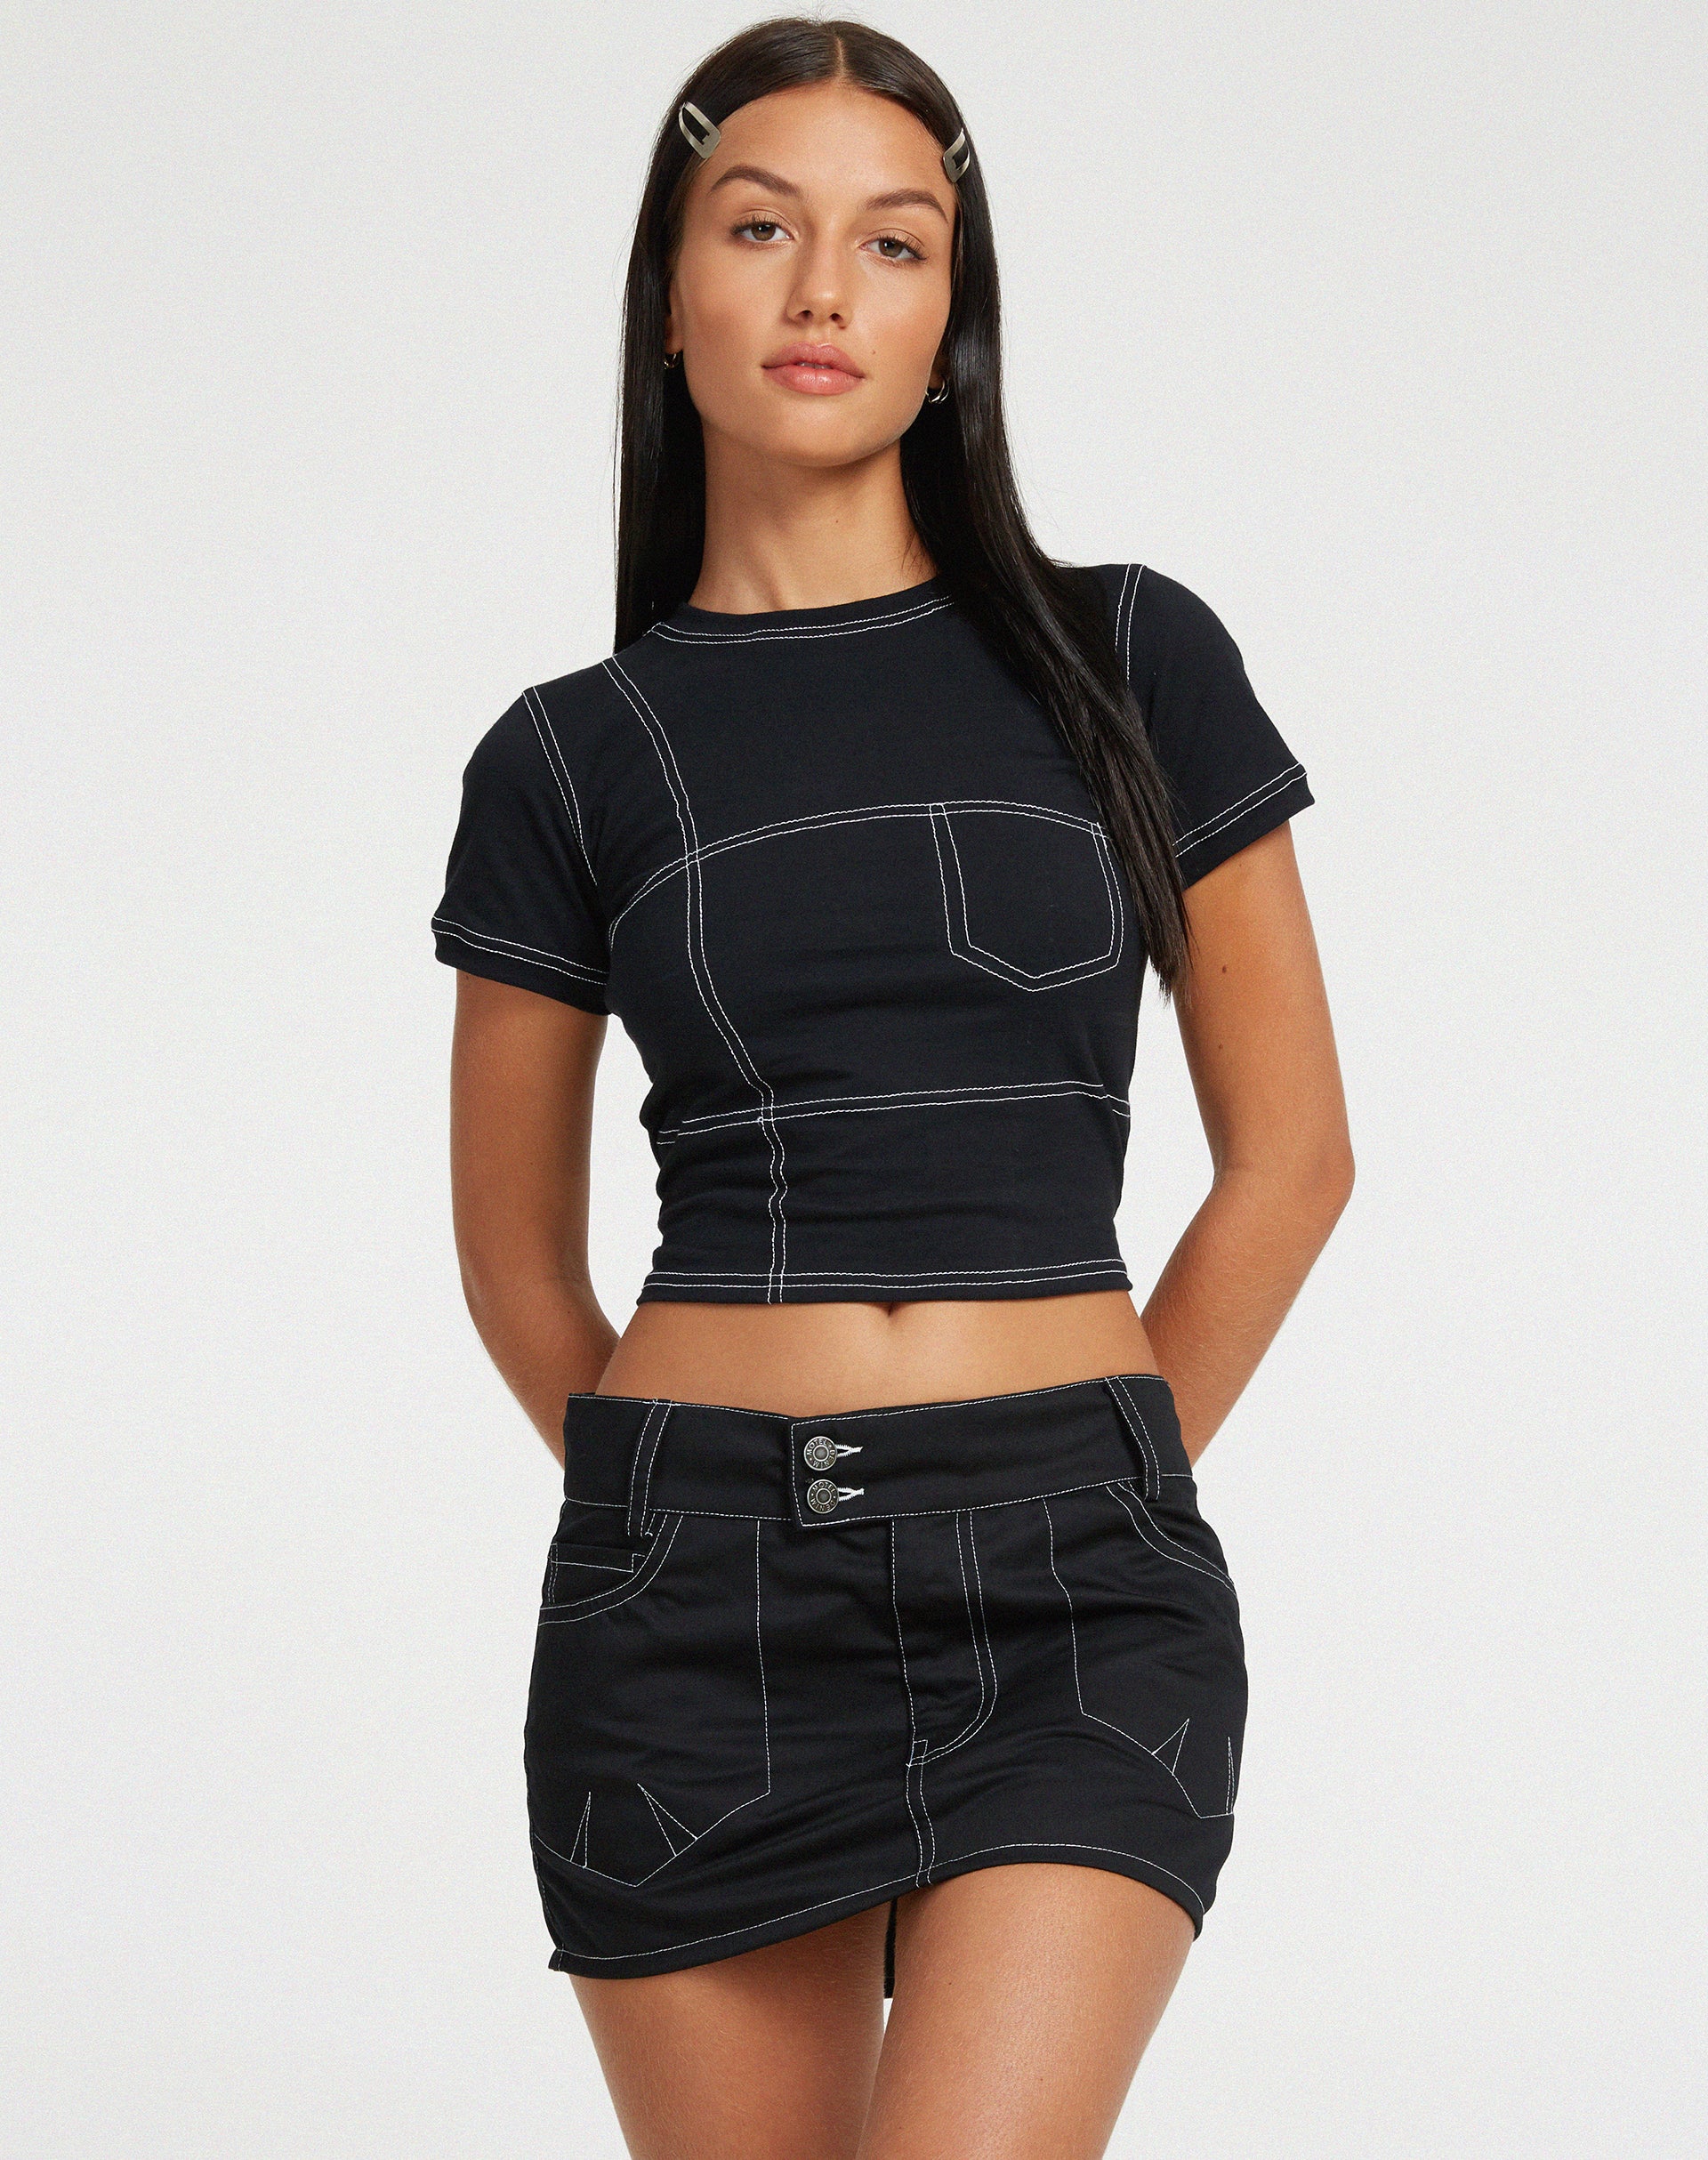 image of Shyla Cropped Tee in Black with White Stitch